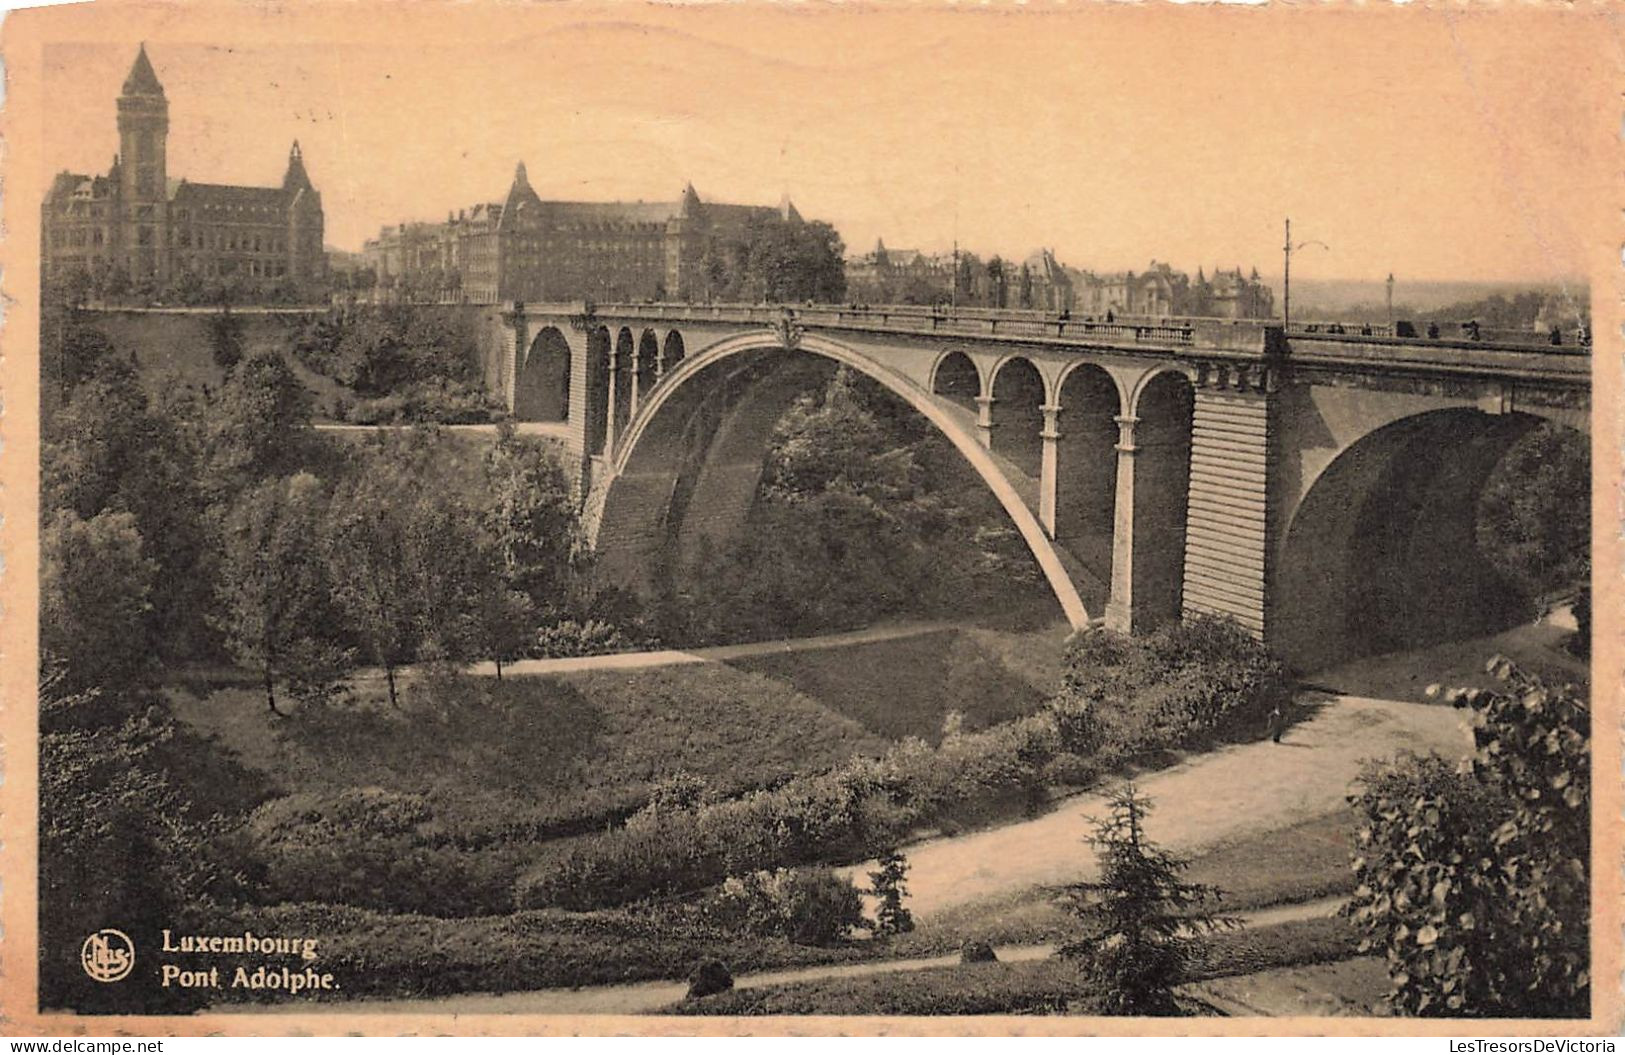 LUXEMBOURG - Luxembourg Ville - Pont Adolphe - Carte Postale Ancienne - Luxemburgo - Ciudad